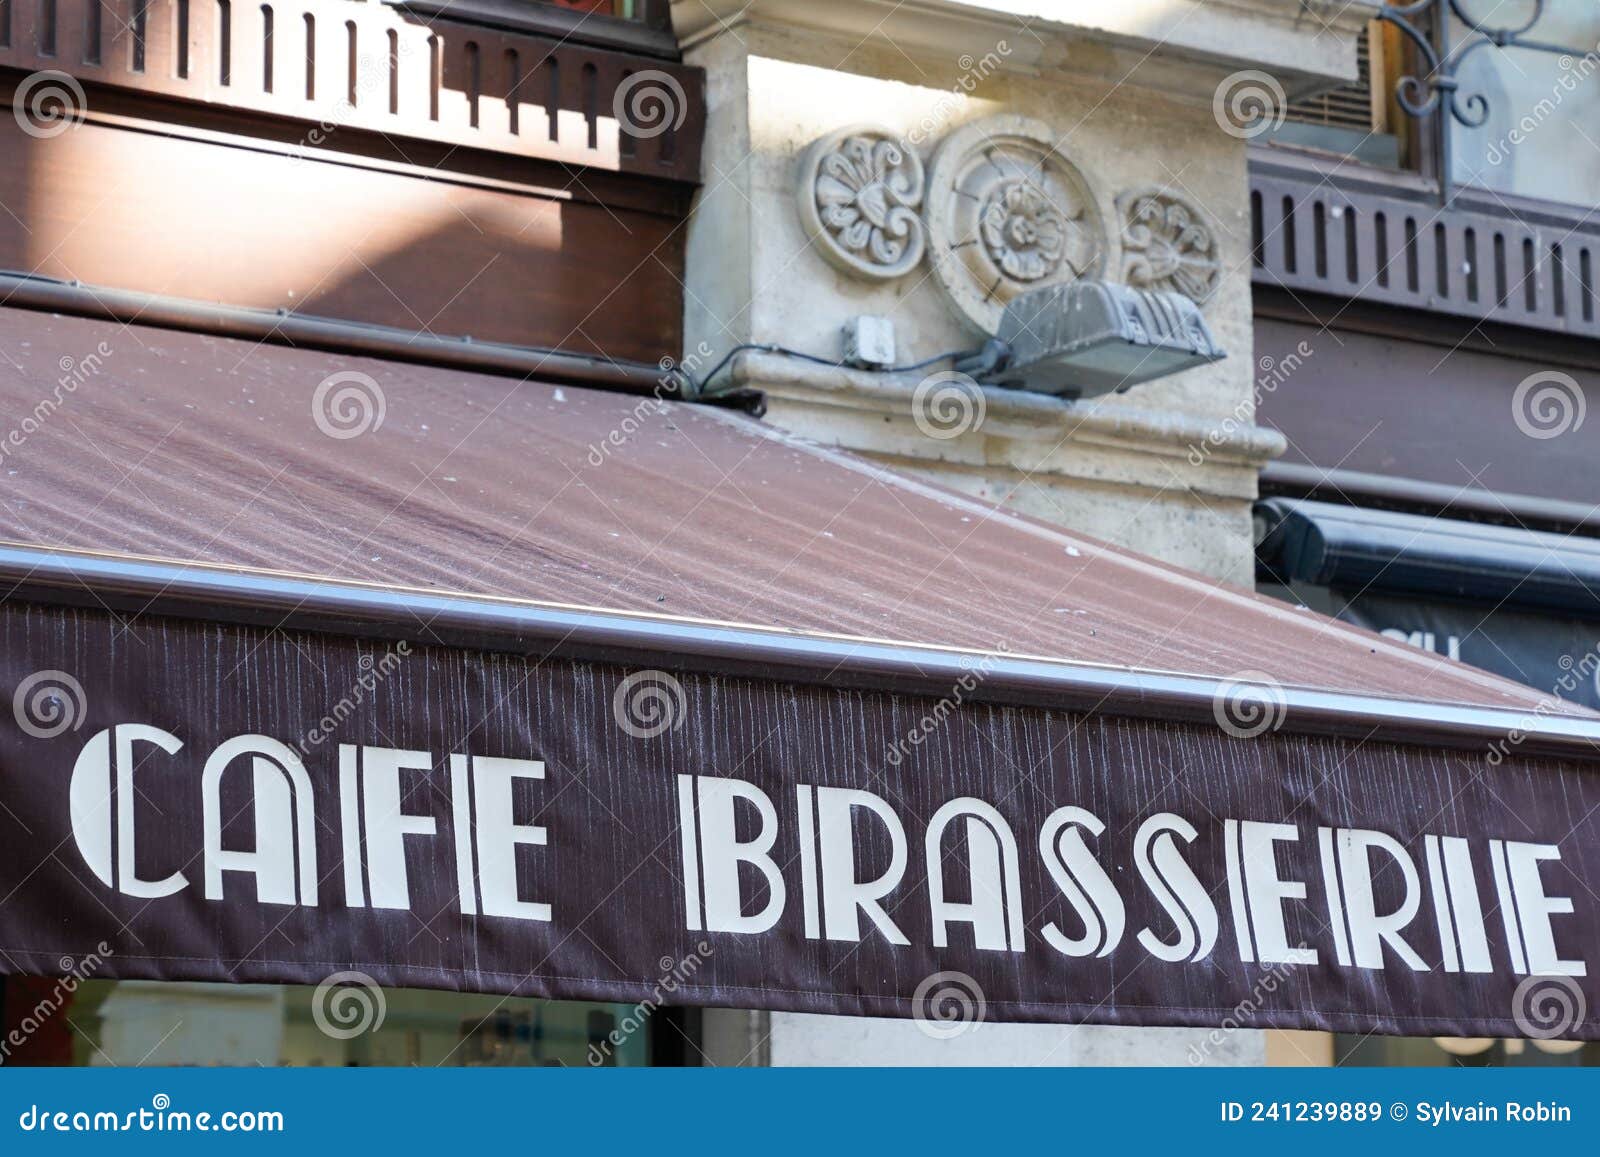 cafe brasserie french sign text means coffee brewery on entrance restaurant in city street storefront building pub entrance